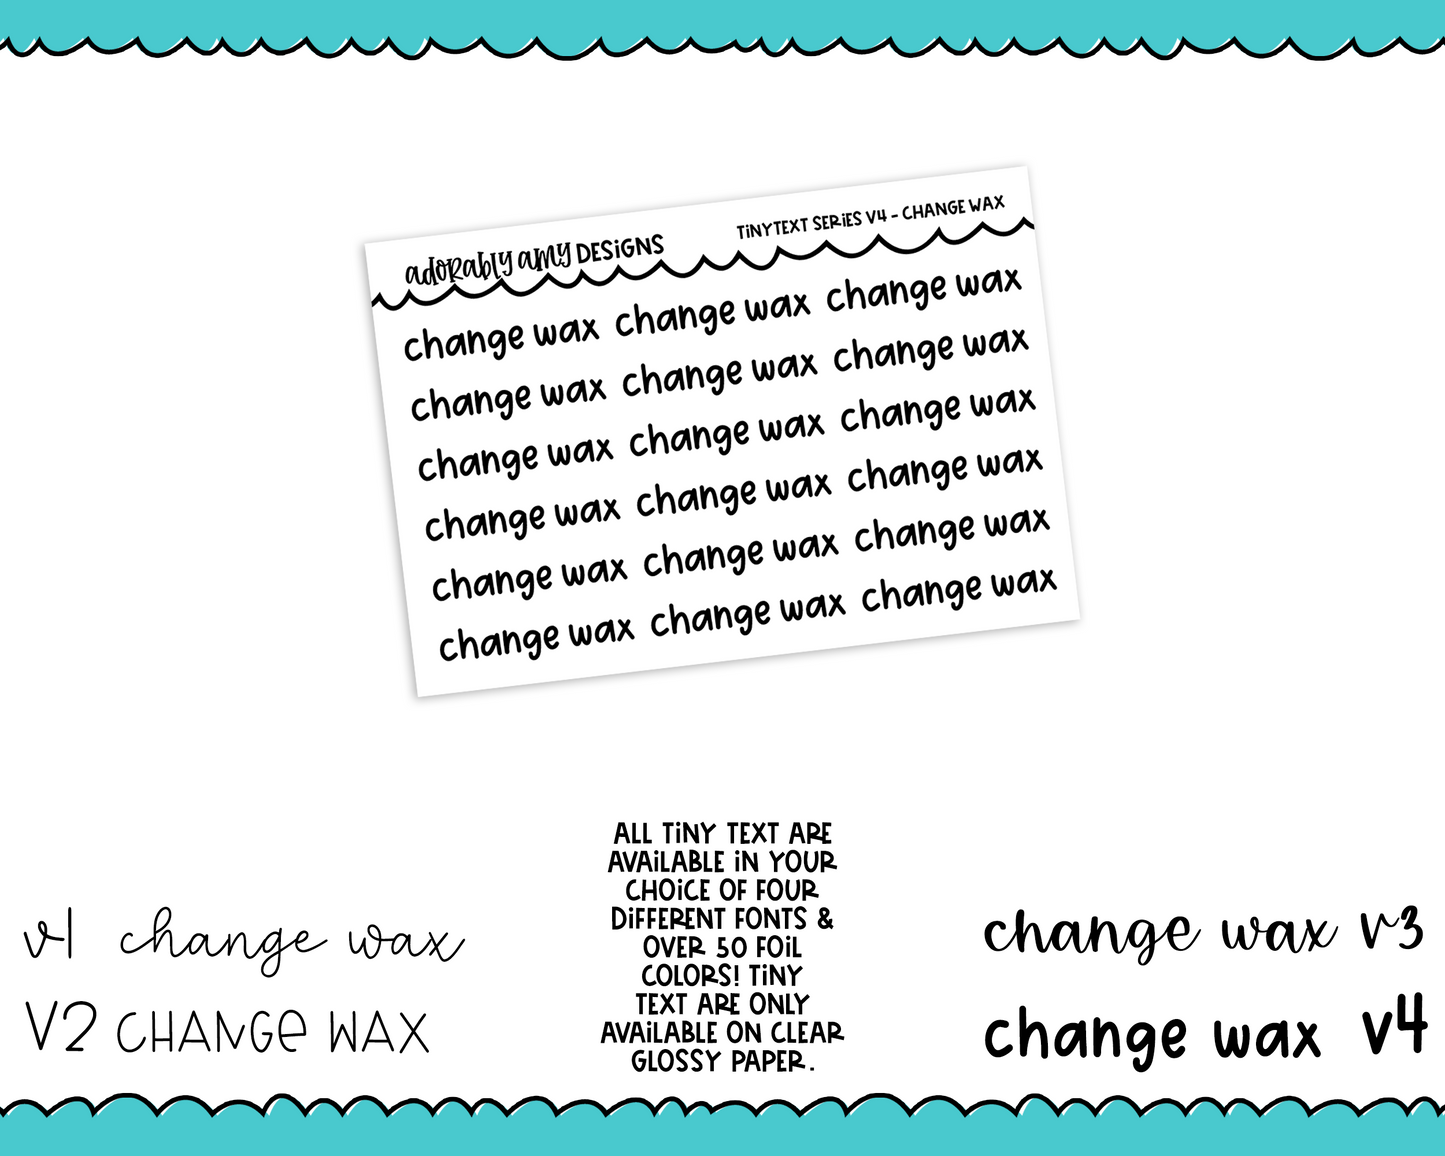 Foiled Tiny Text Series - Change Wax Checklist Size Planner Stickers for any Planner or Insert